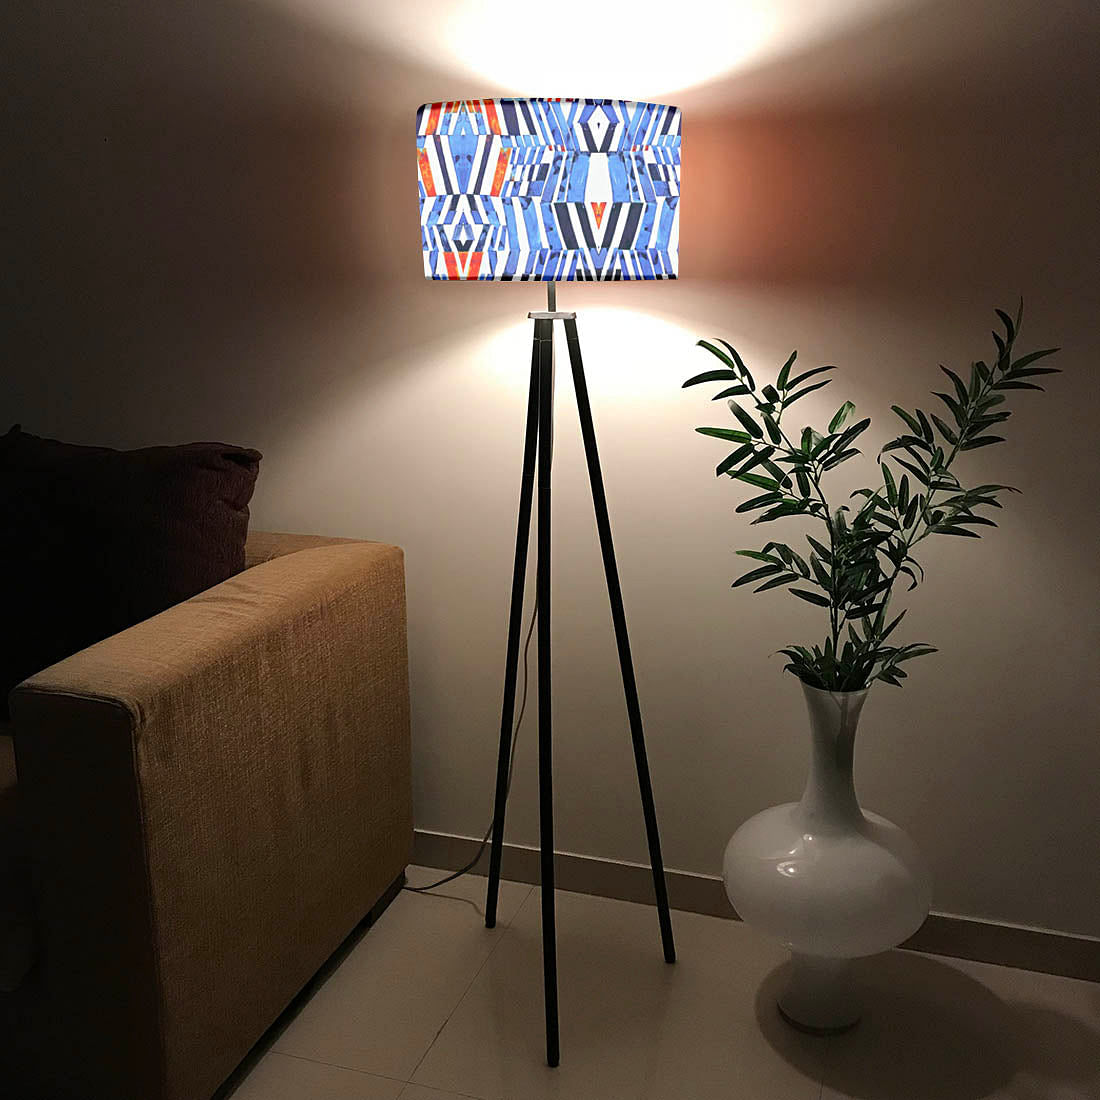 Tripod Floor Lamp Standing Light for Living Rooms - Mad Mosaic Nutcase